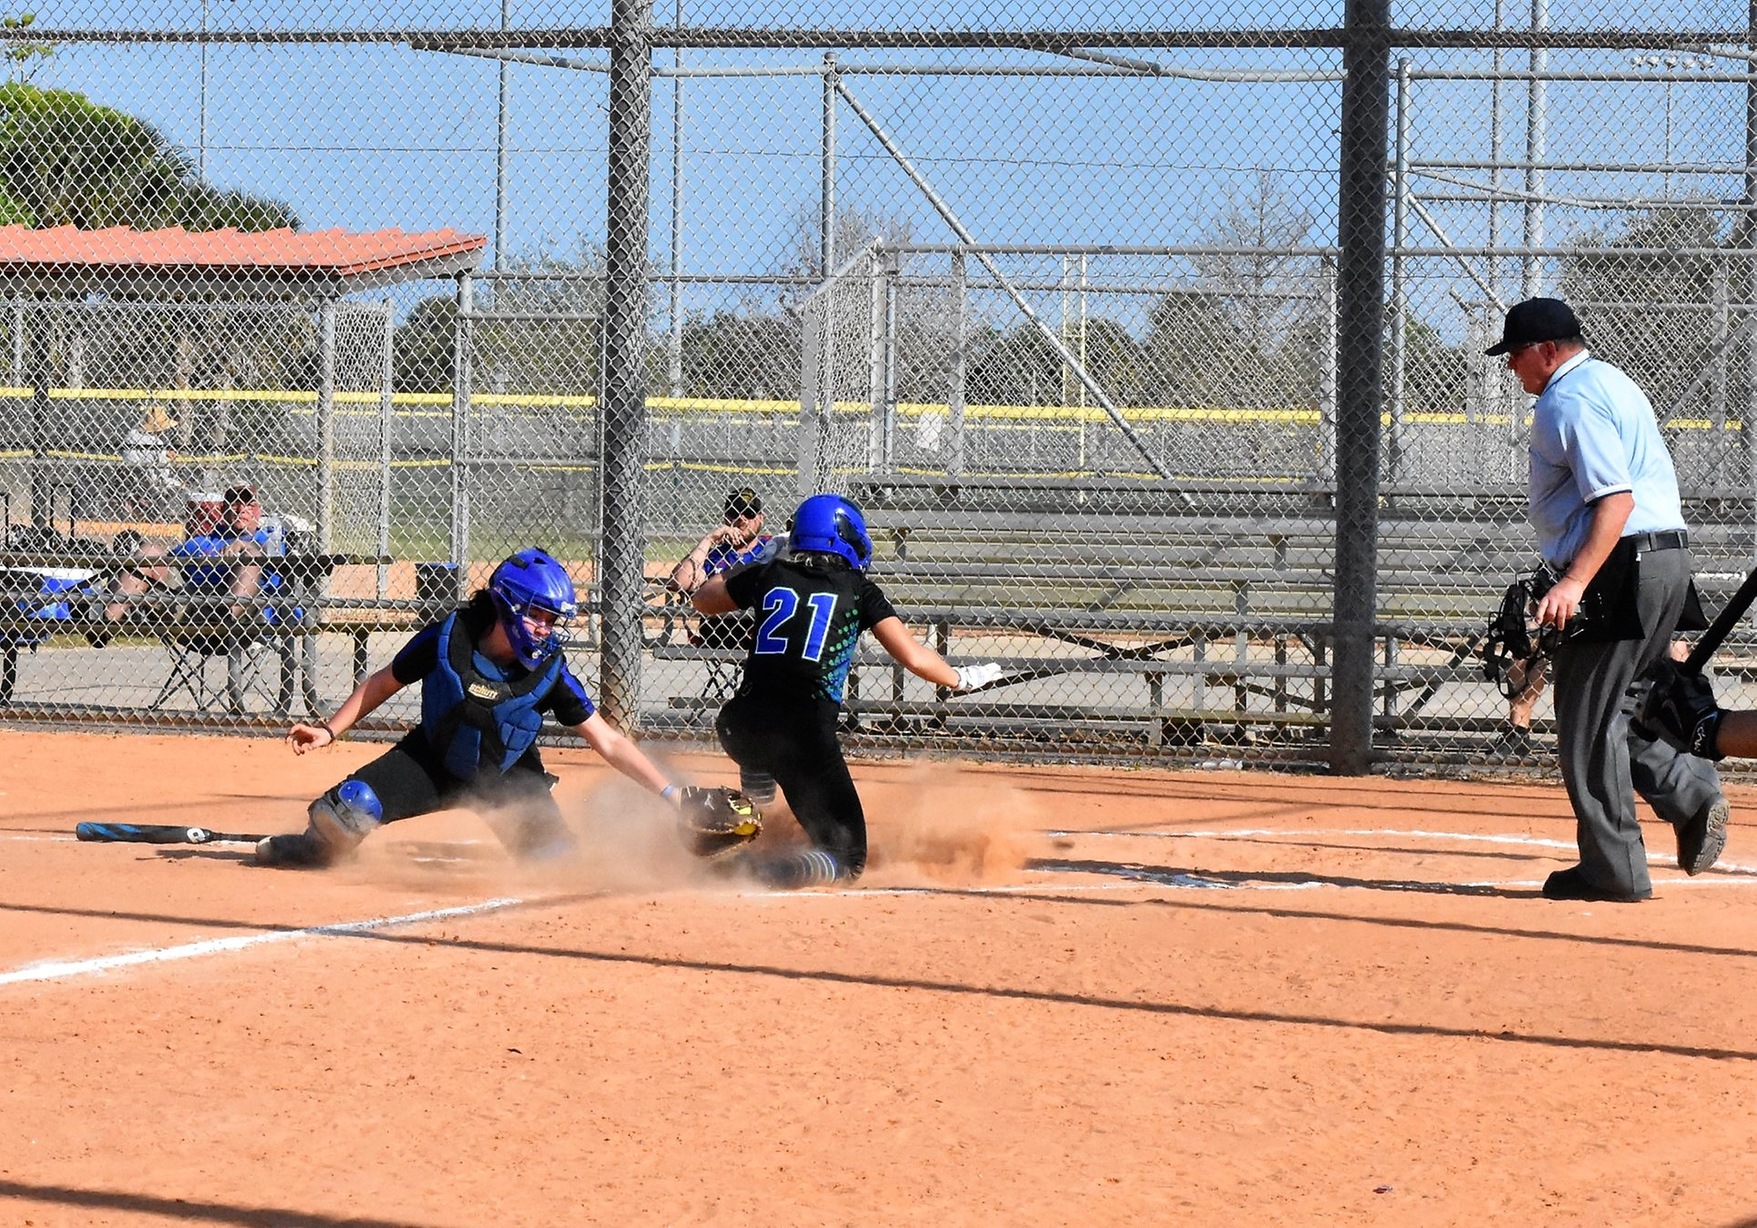 Emily Bruntjens after a slide into home plate. The catcher is reaching behind Emily with the ball in her glove.  The umpire looks on from foul territory